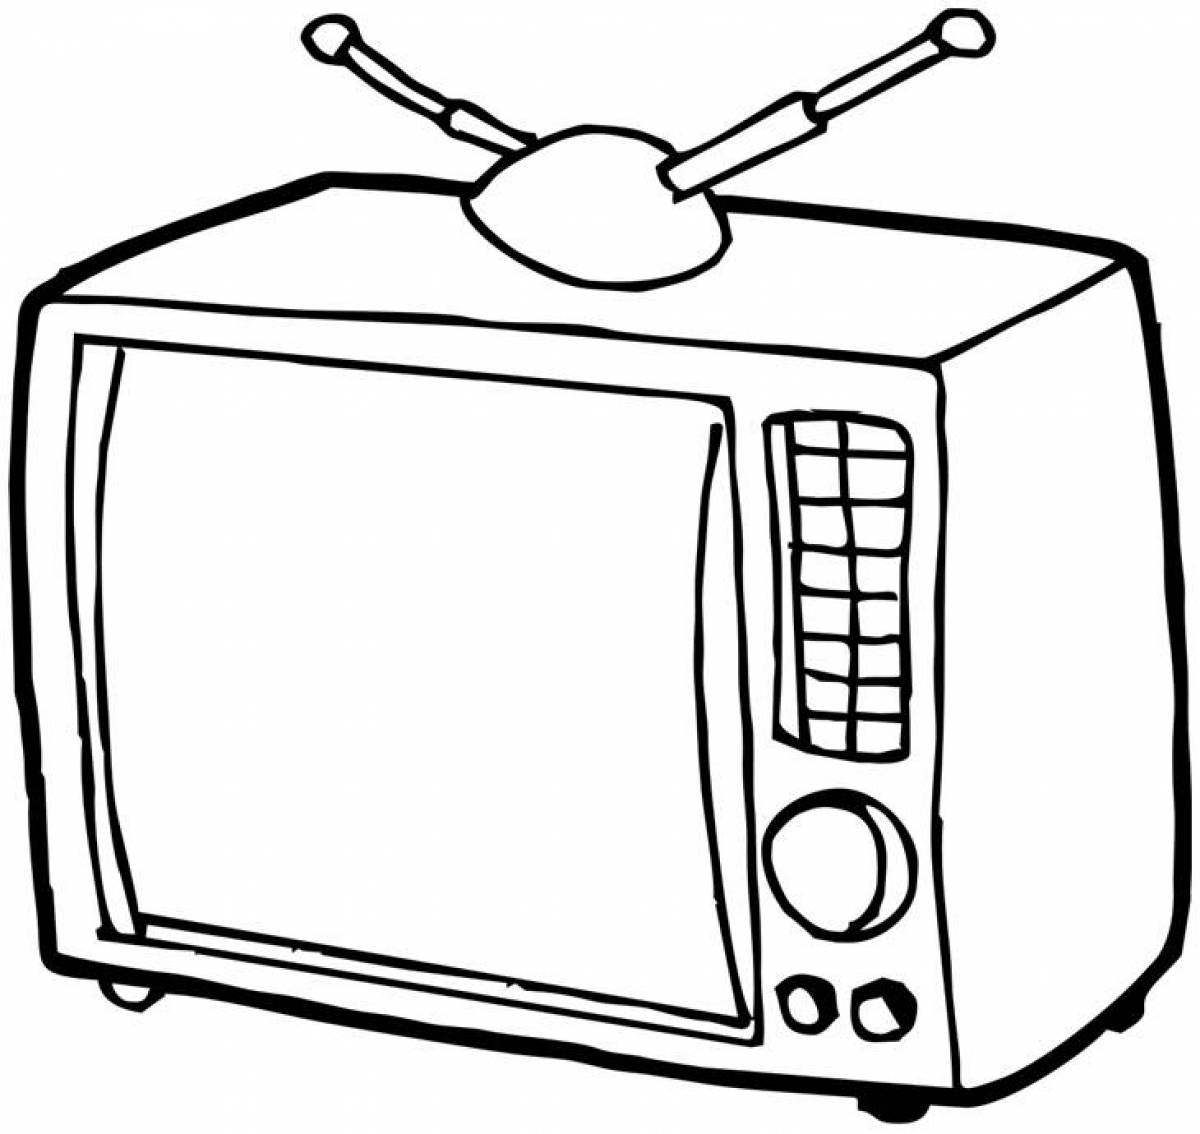 Coloring page fascinating electrical appliances